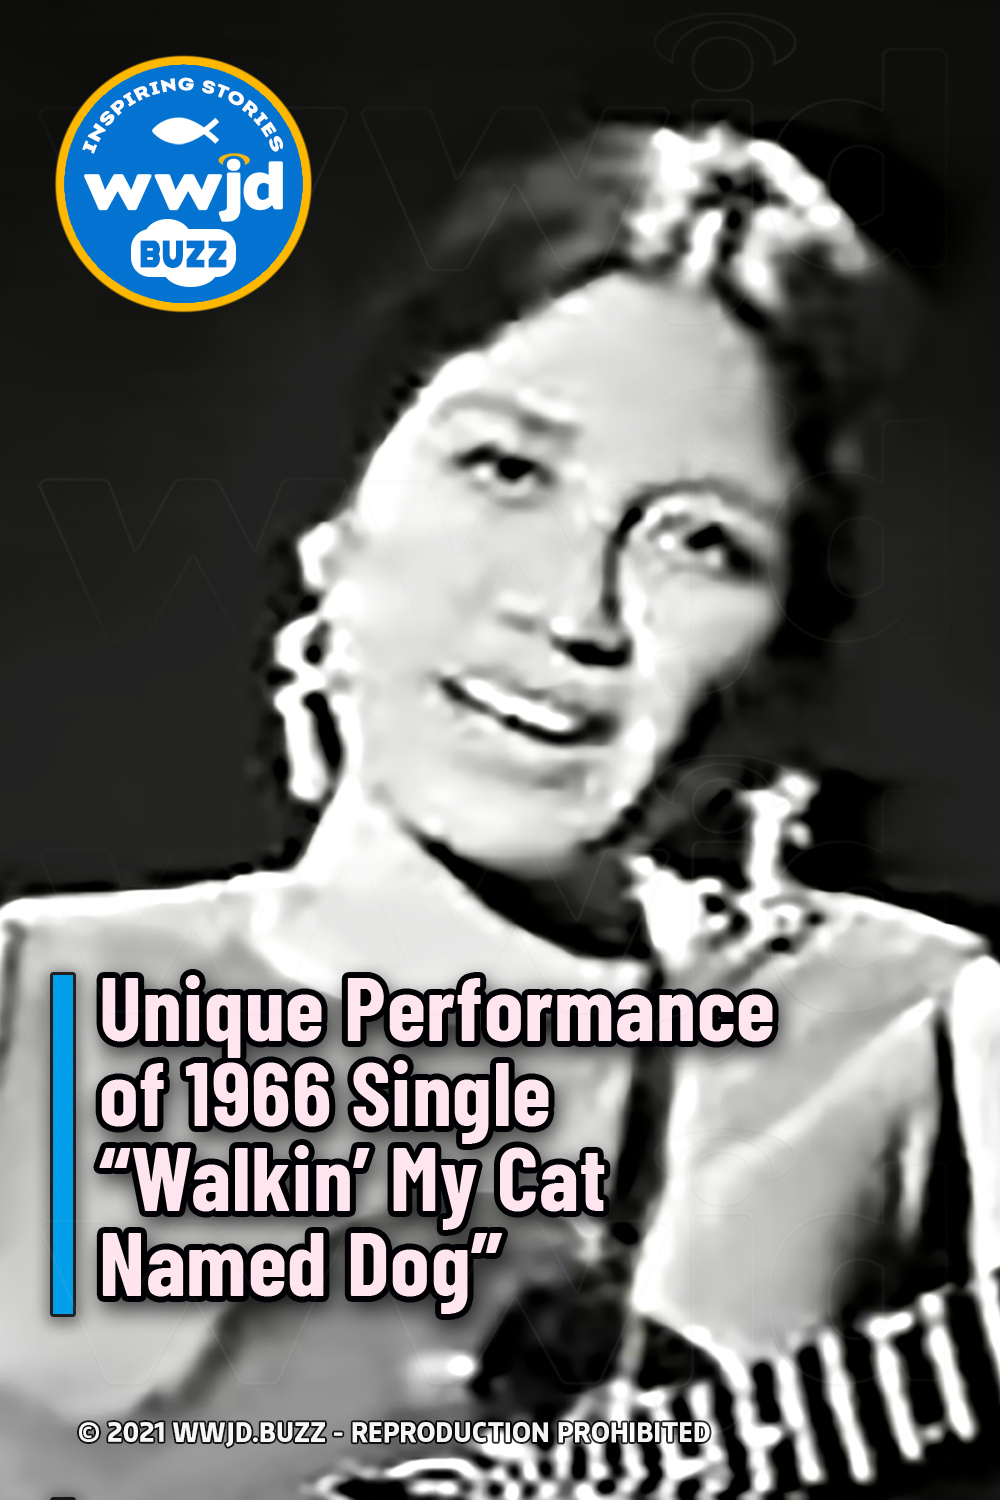 Unique Performance of 1966 Single “Walkin’ My Cat Named Dog”